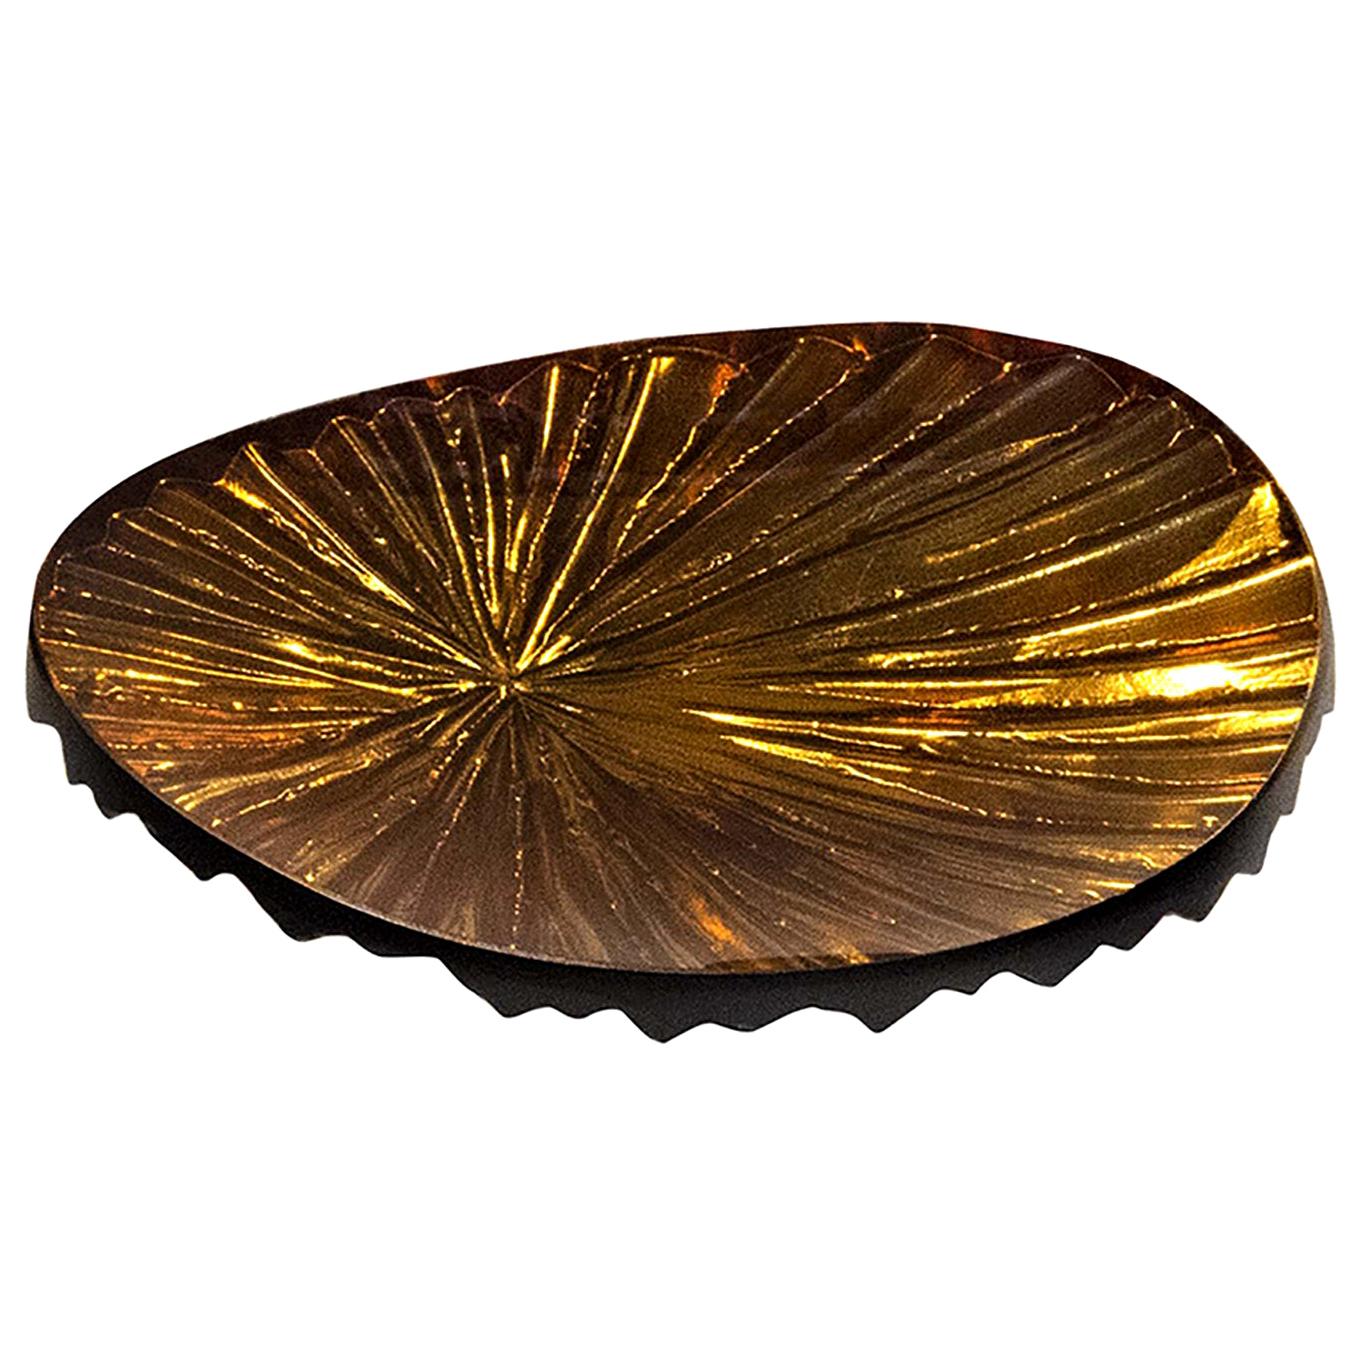 Contemporary by Ghirò Studio 'Oasi' Crystal Bowl Amber and Gold Big Size